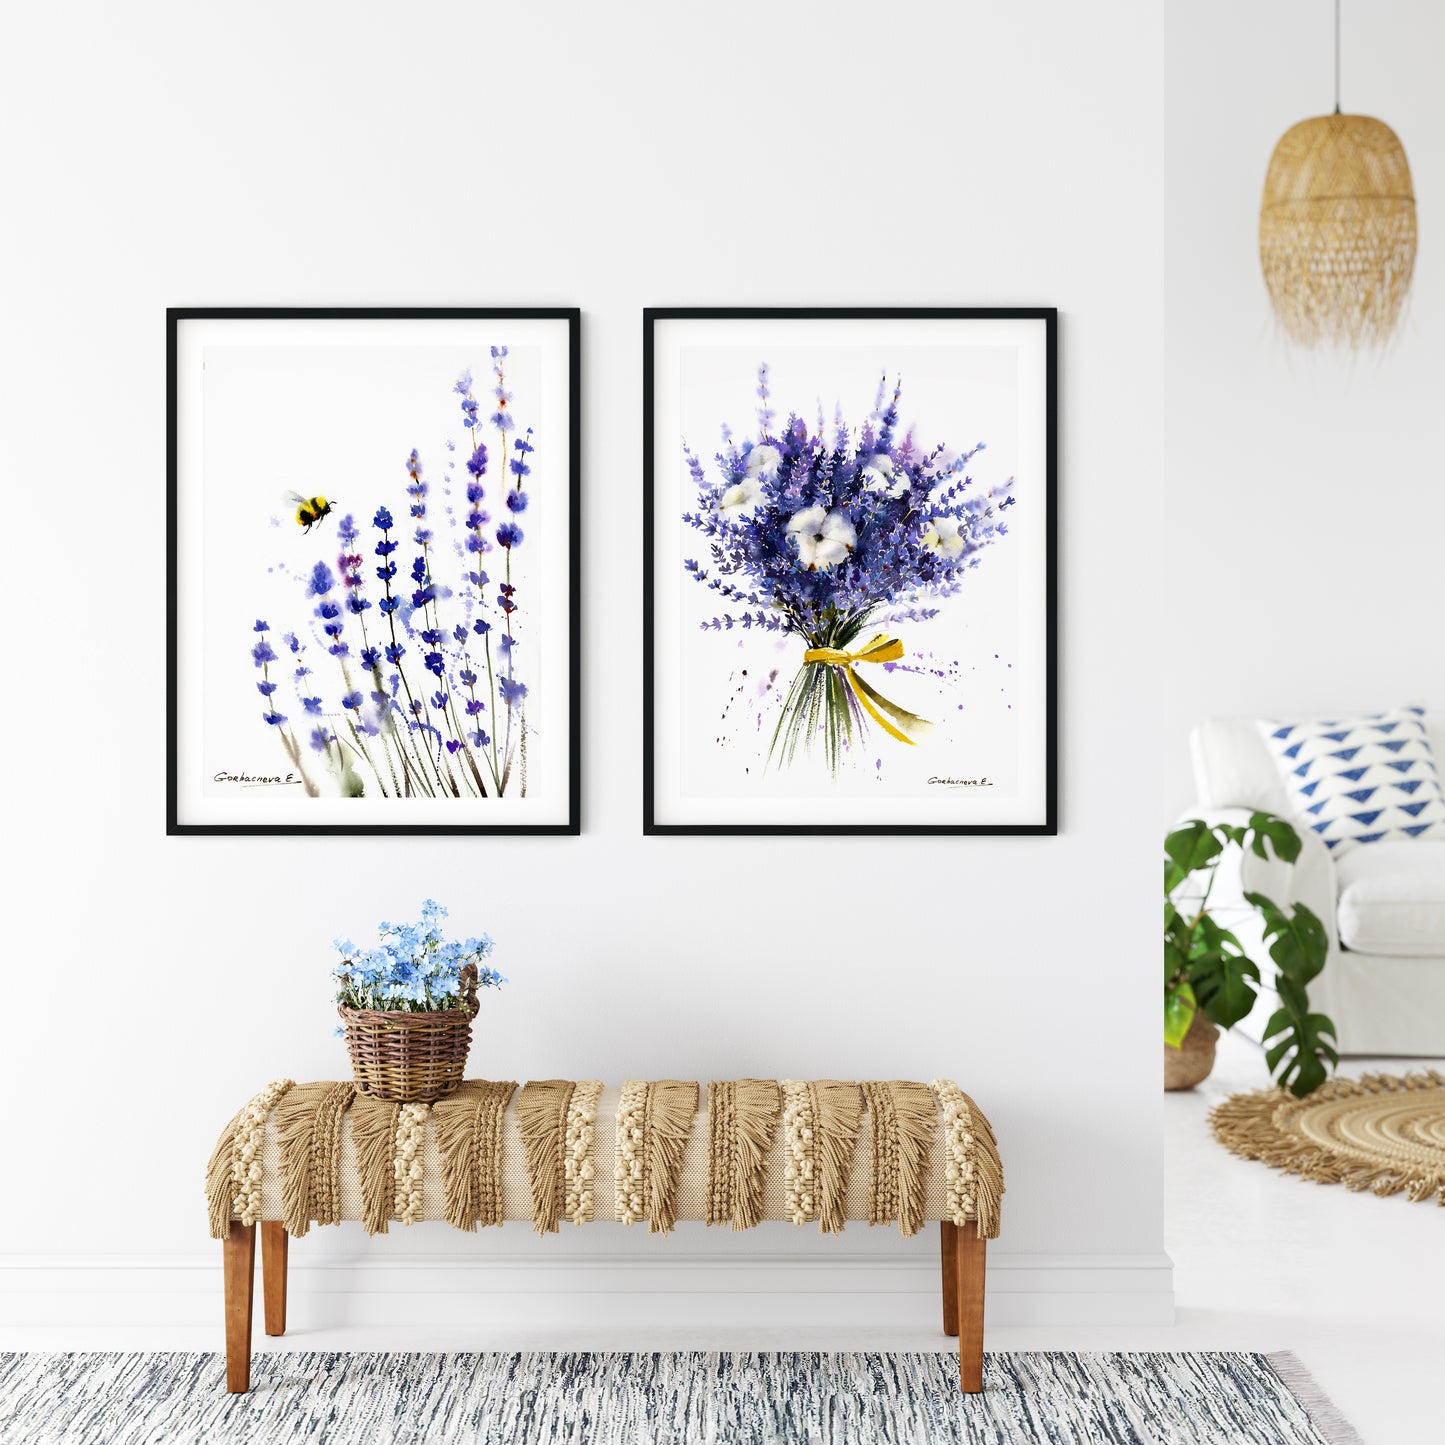 Set of 2 Lavender Wall Art, Purple Flower Prints, Bedroom Country Decor, Provence Art, Bee Flowers Watercolor Painting